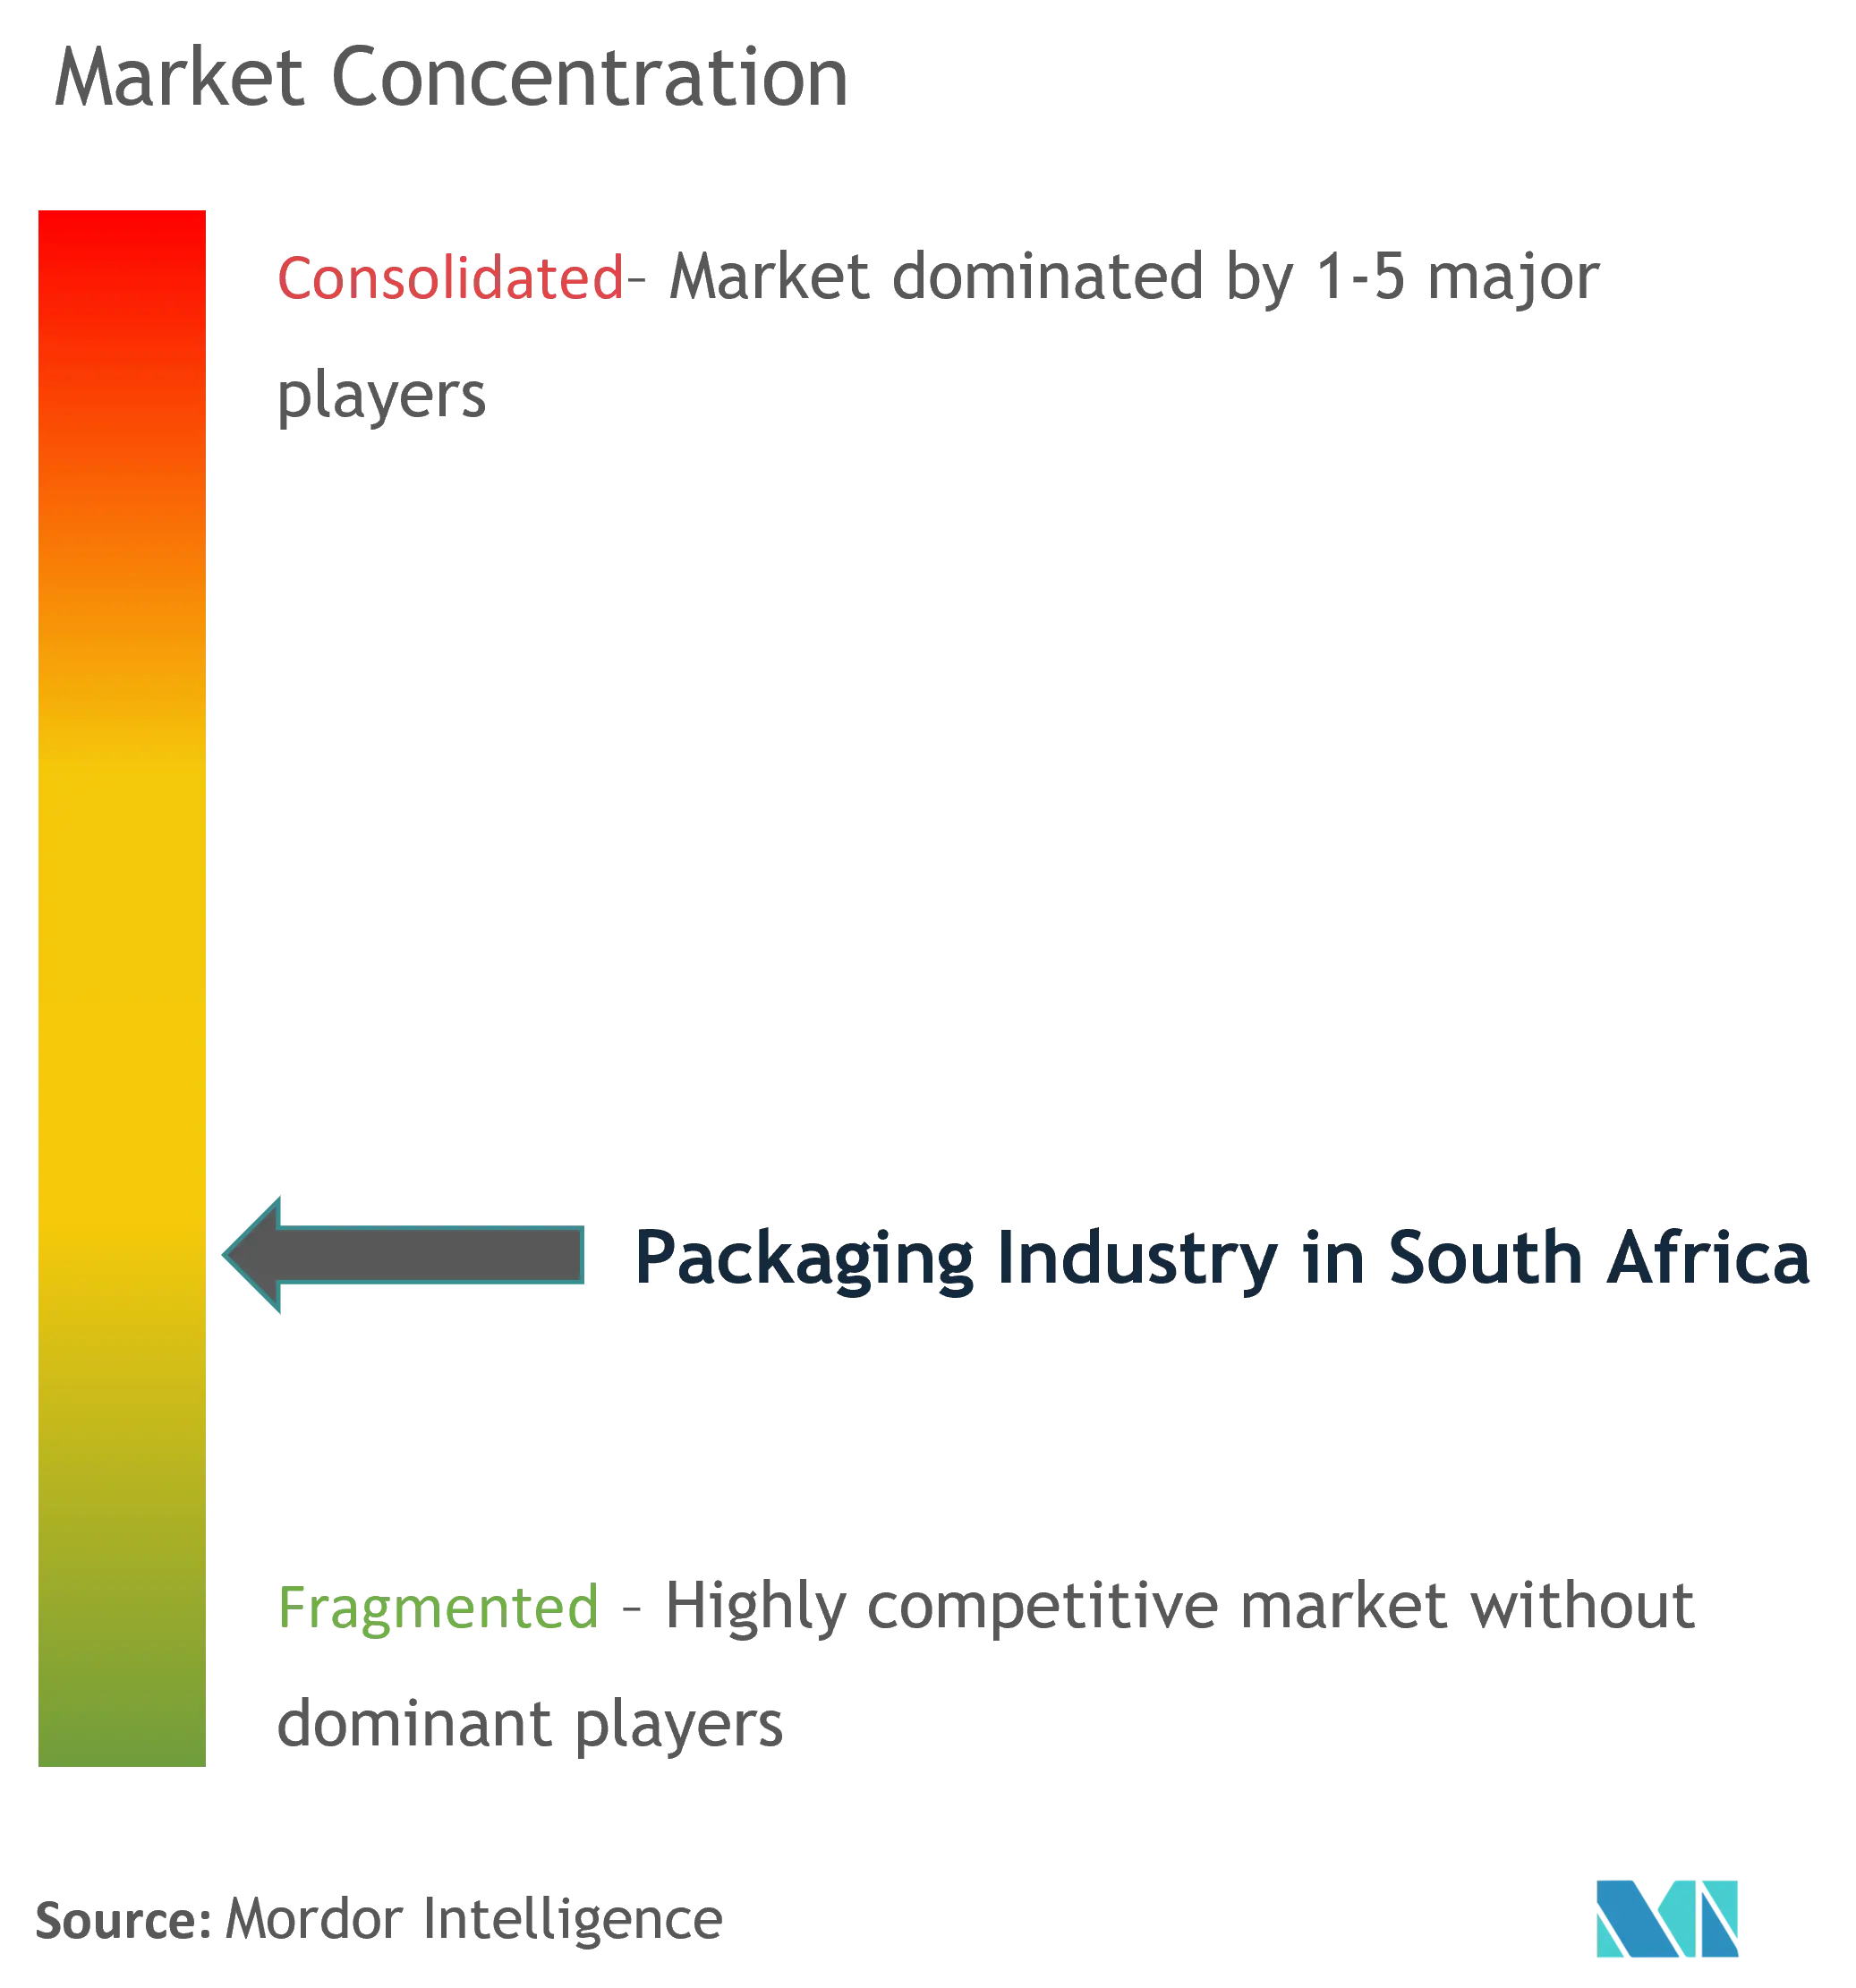 Packaging Industry in South Africa Market Concentration